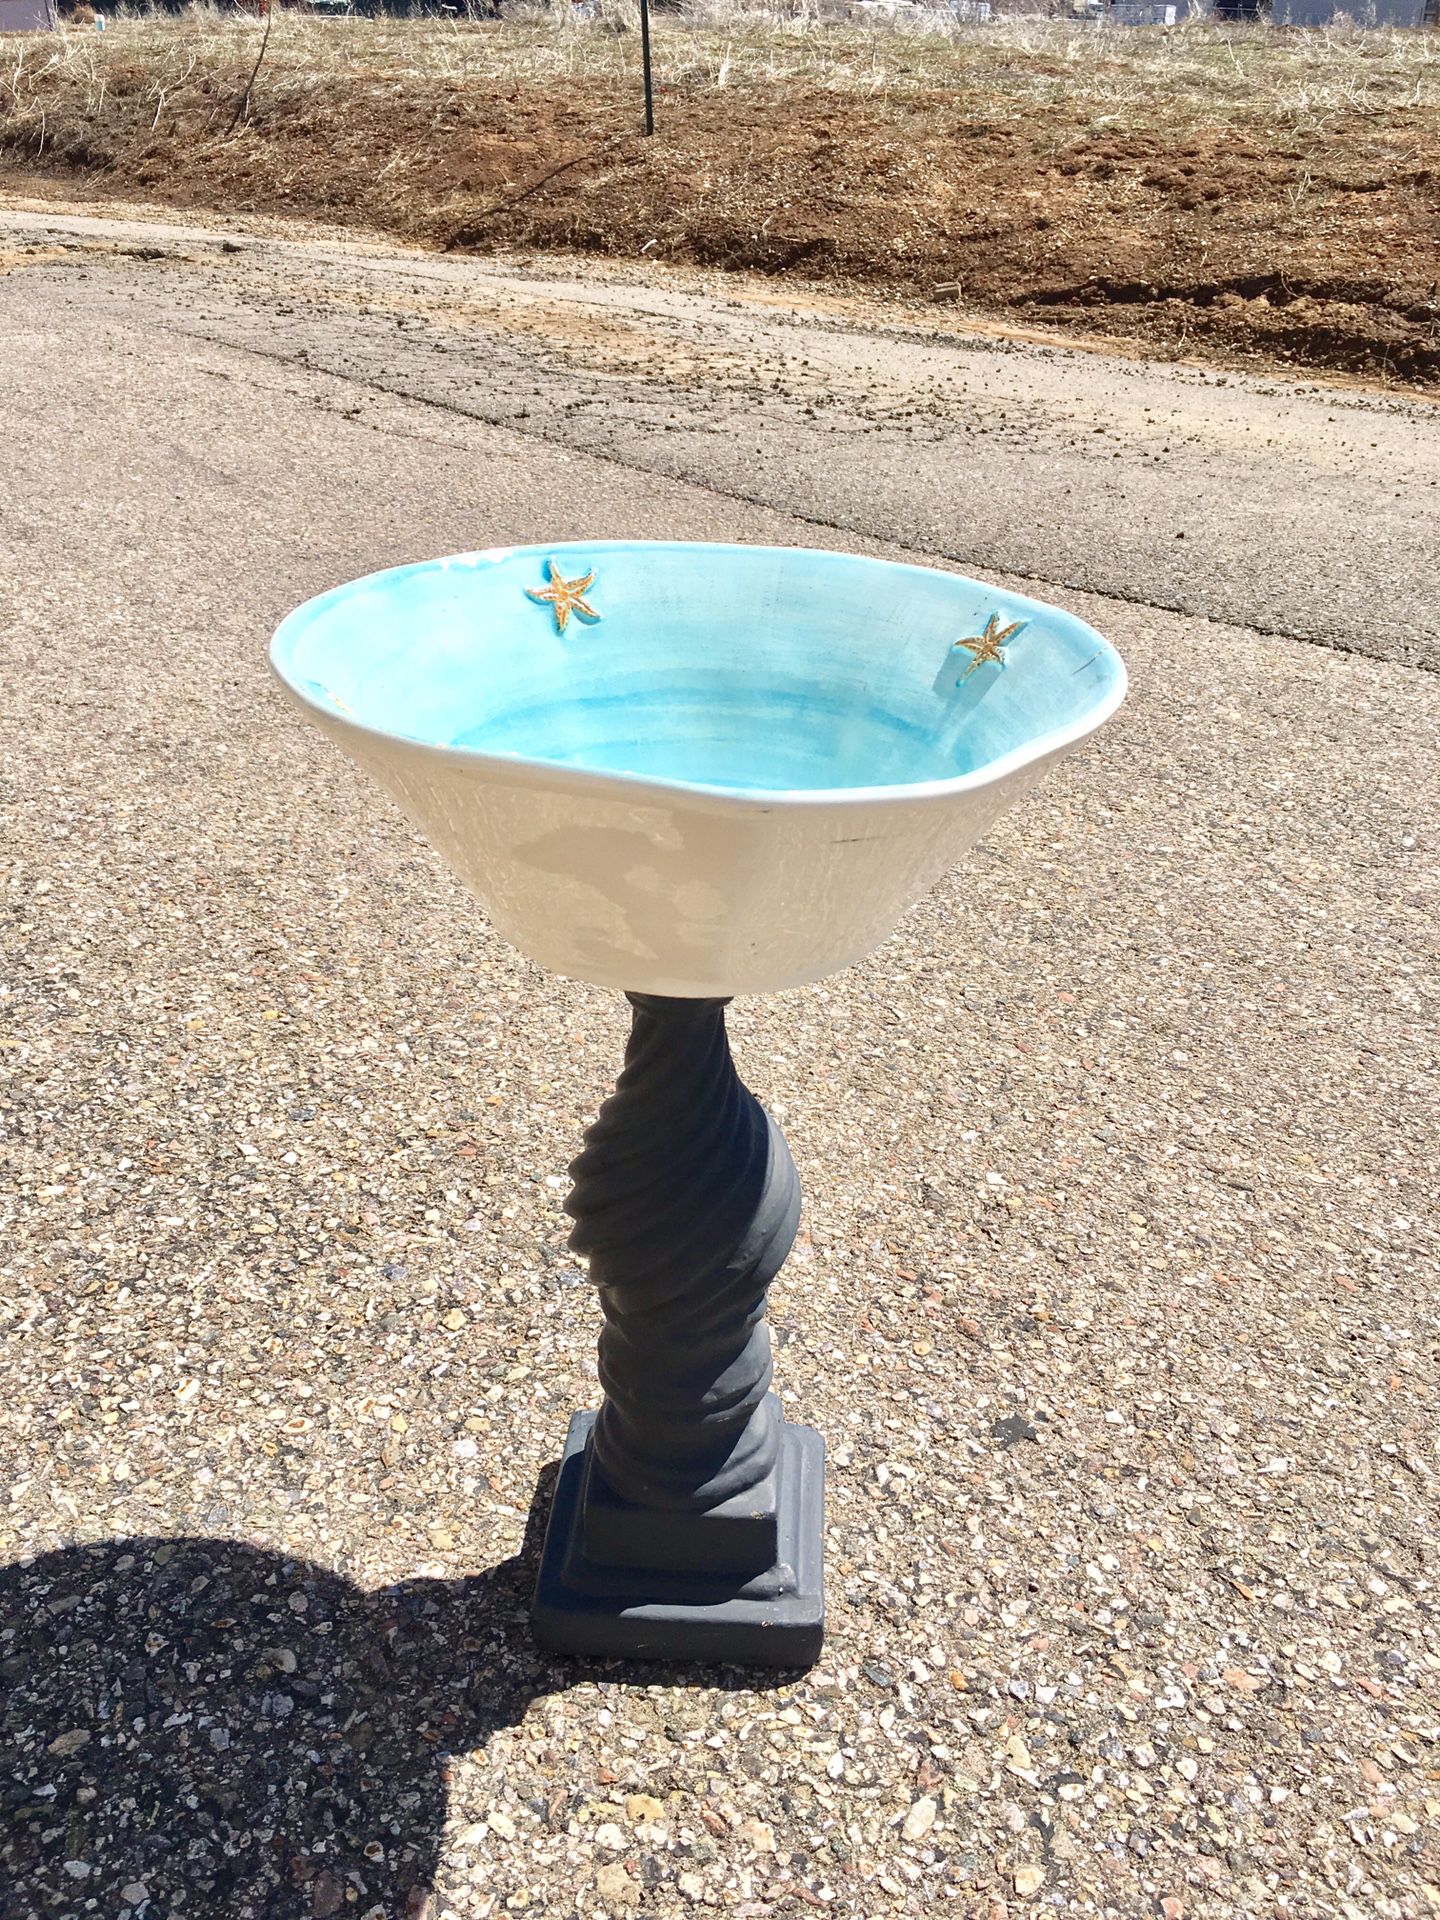 Bird Bath or Feeder for your Spring Garden Pottery Barn Bowl with Ornate Stand!